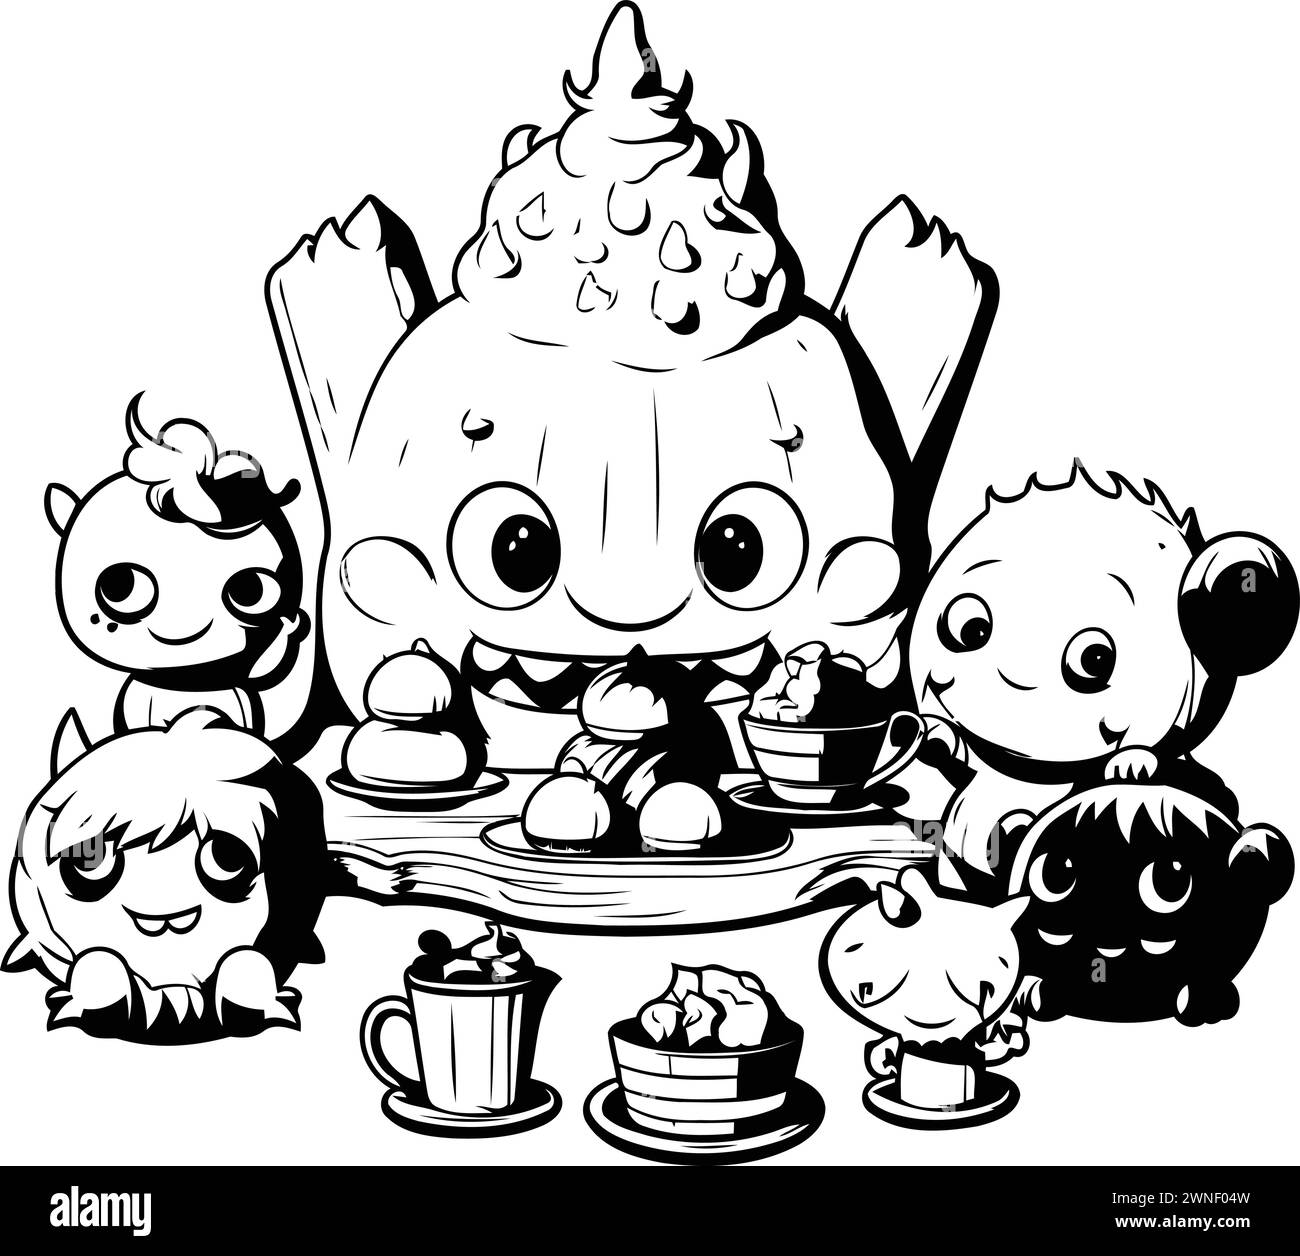 Black and White Cartoon Illustration of Cute Animal Characters for Coloring Book Stock Vector